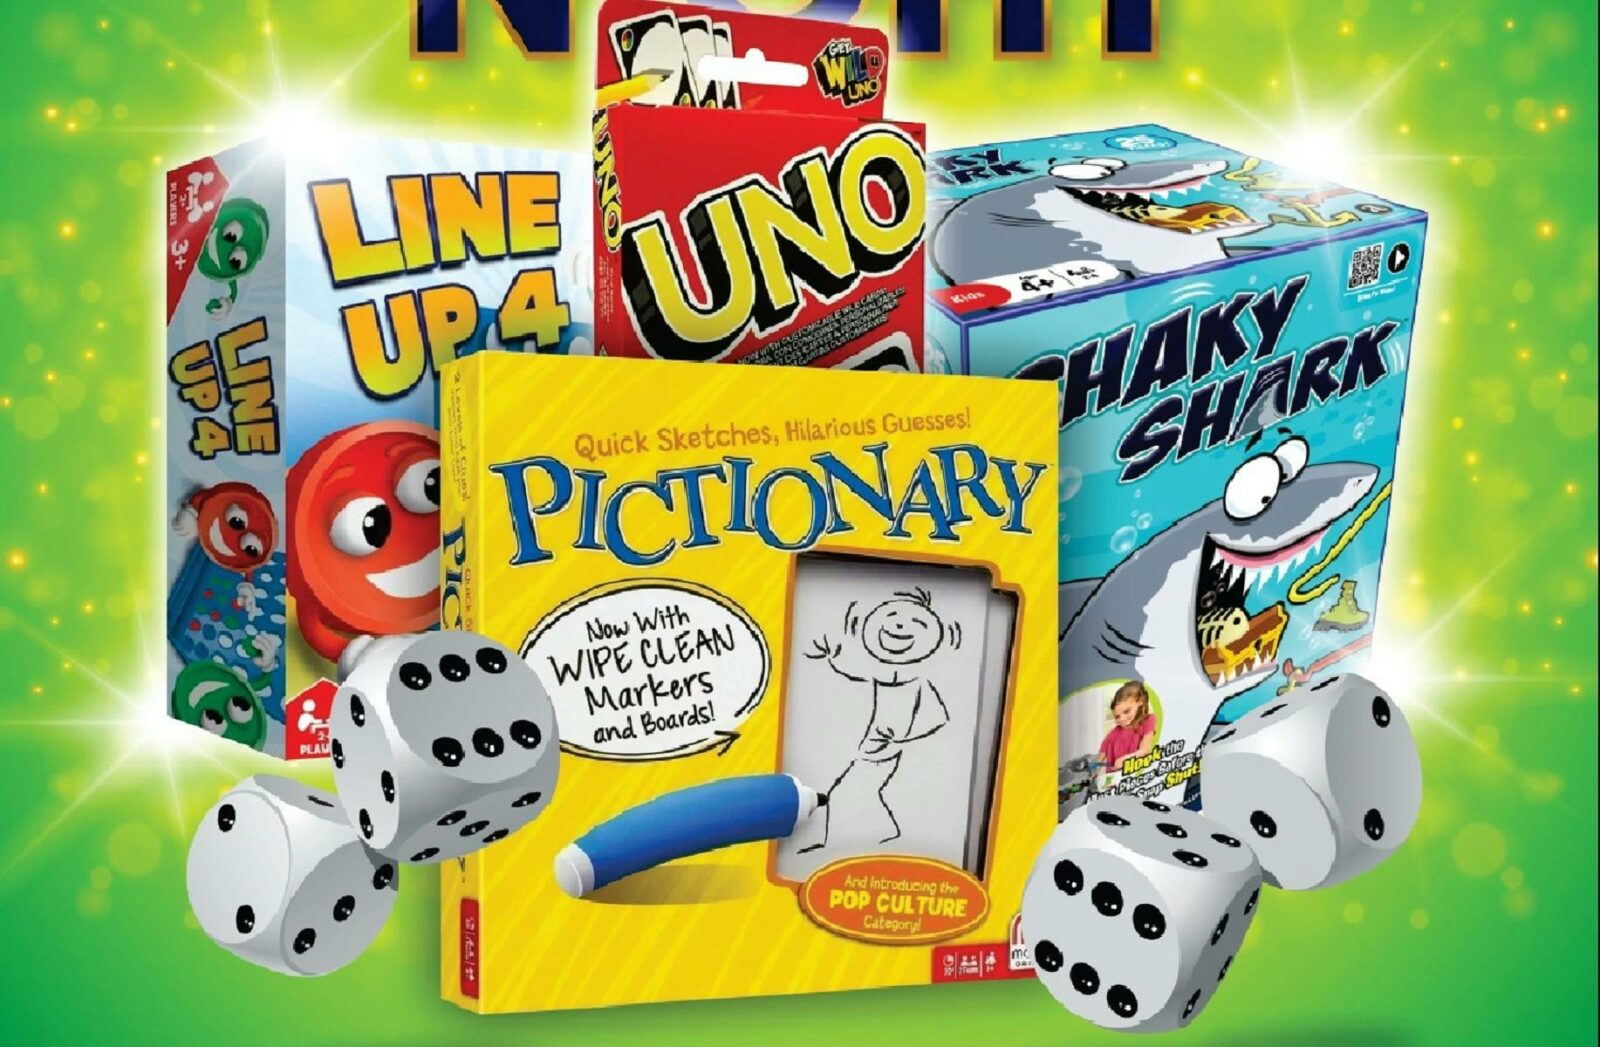 Wednesday Games Night includes games such as Pictionary, Uno, Shaky Shark, Line Up 4